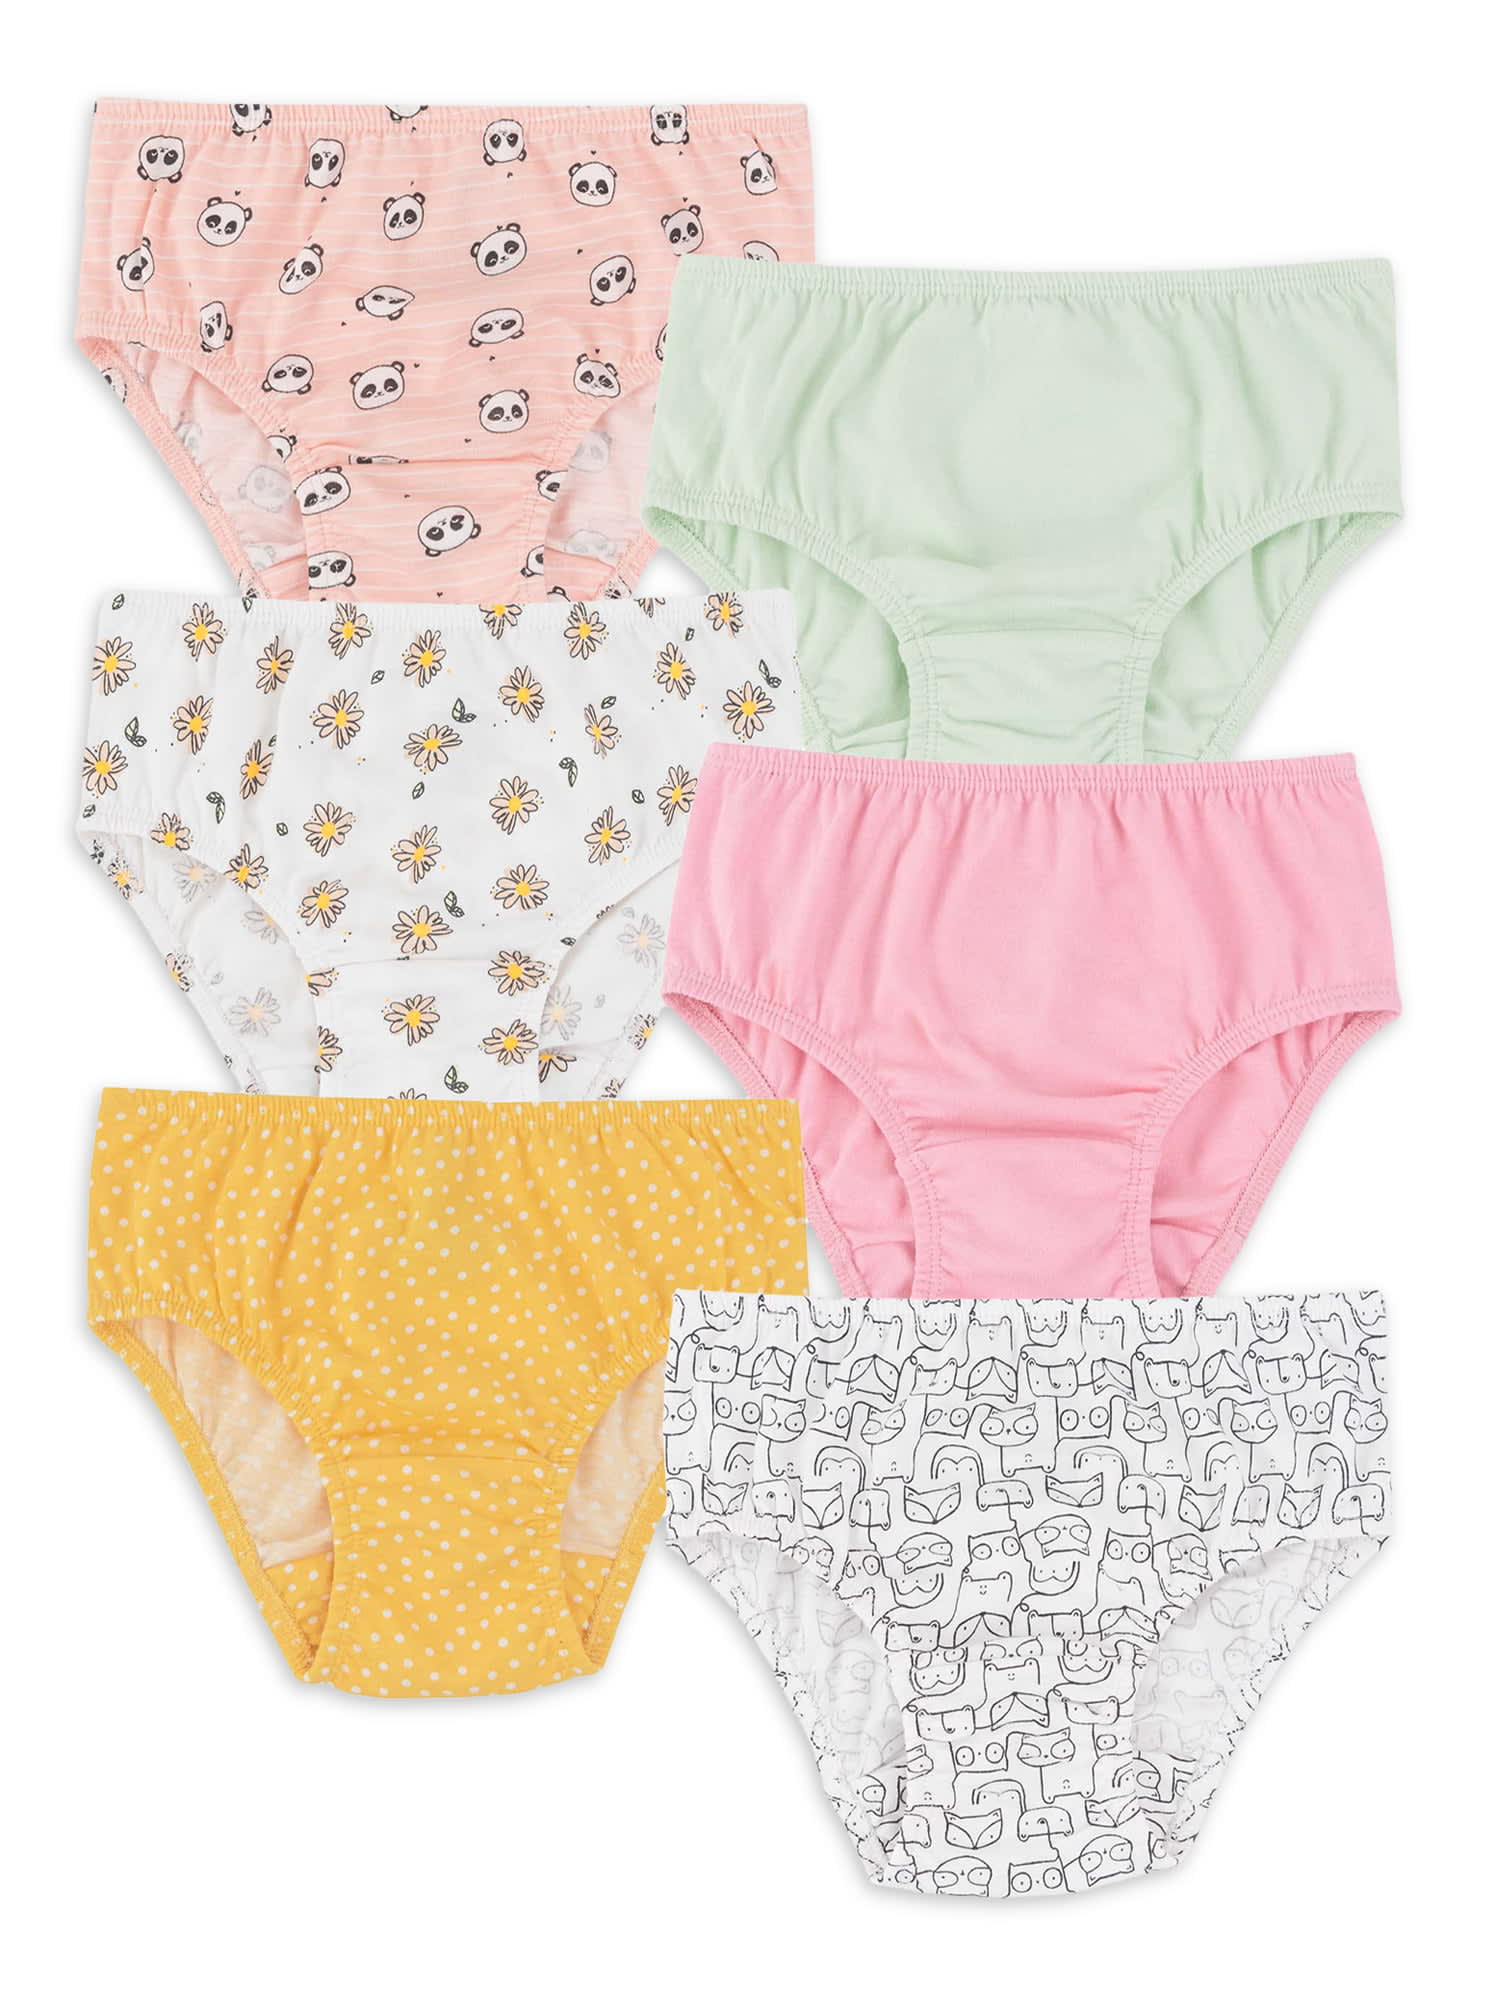 Wonder Nation Toddler Girls Briefs, 10-Pack, Sizes 2T-5T - DroneUp Delivery